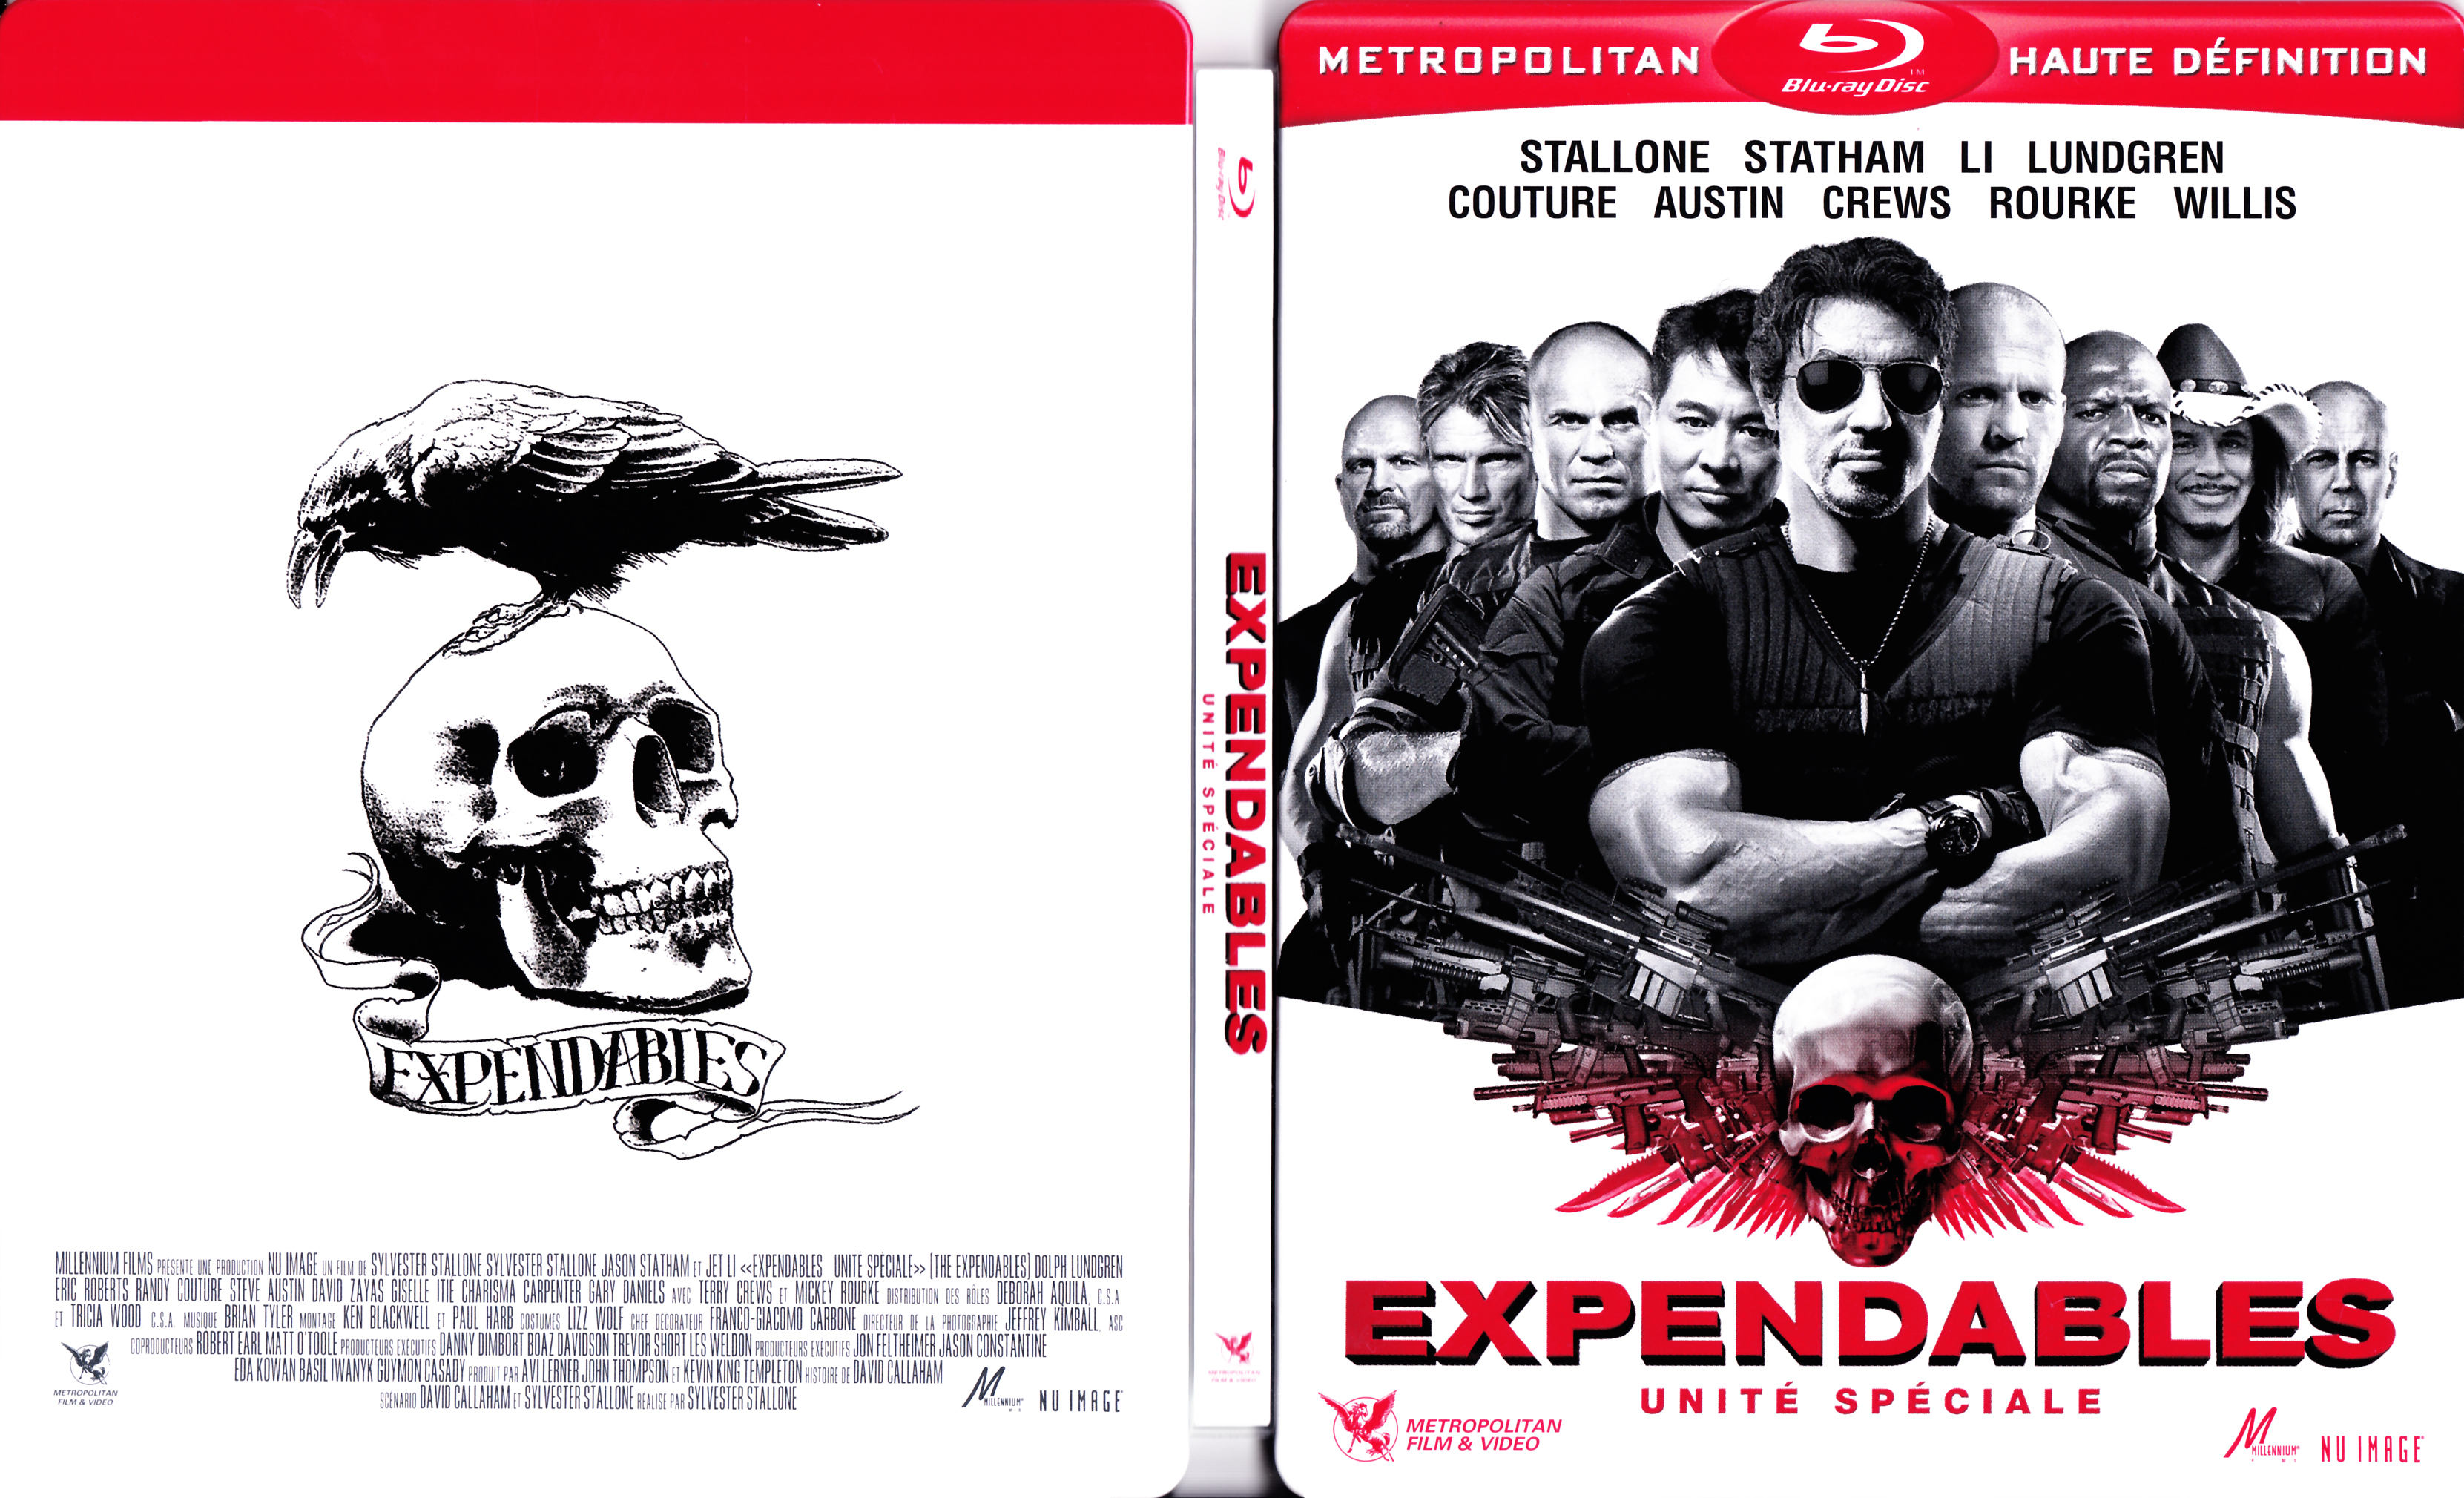 Jaquette DVD Expendables (BLU-RAY) v2